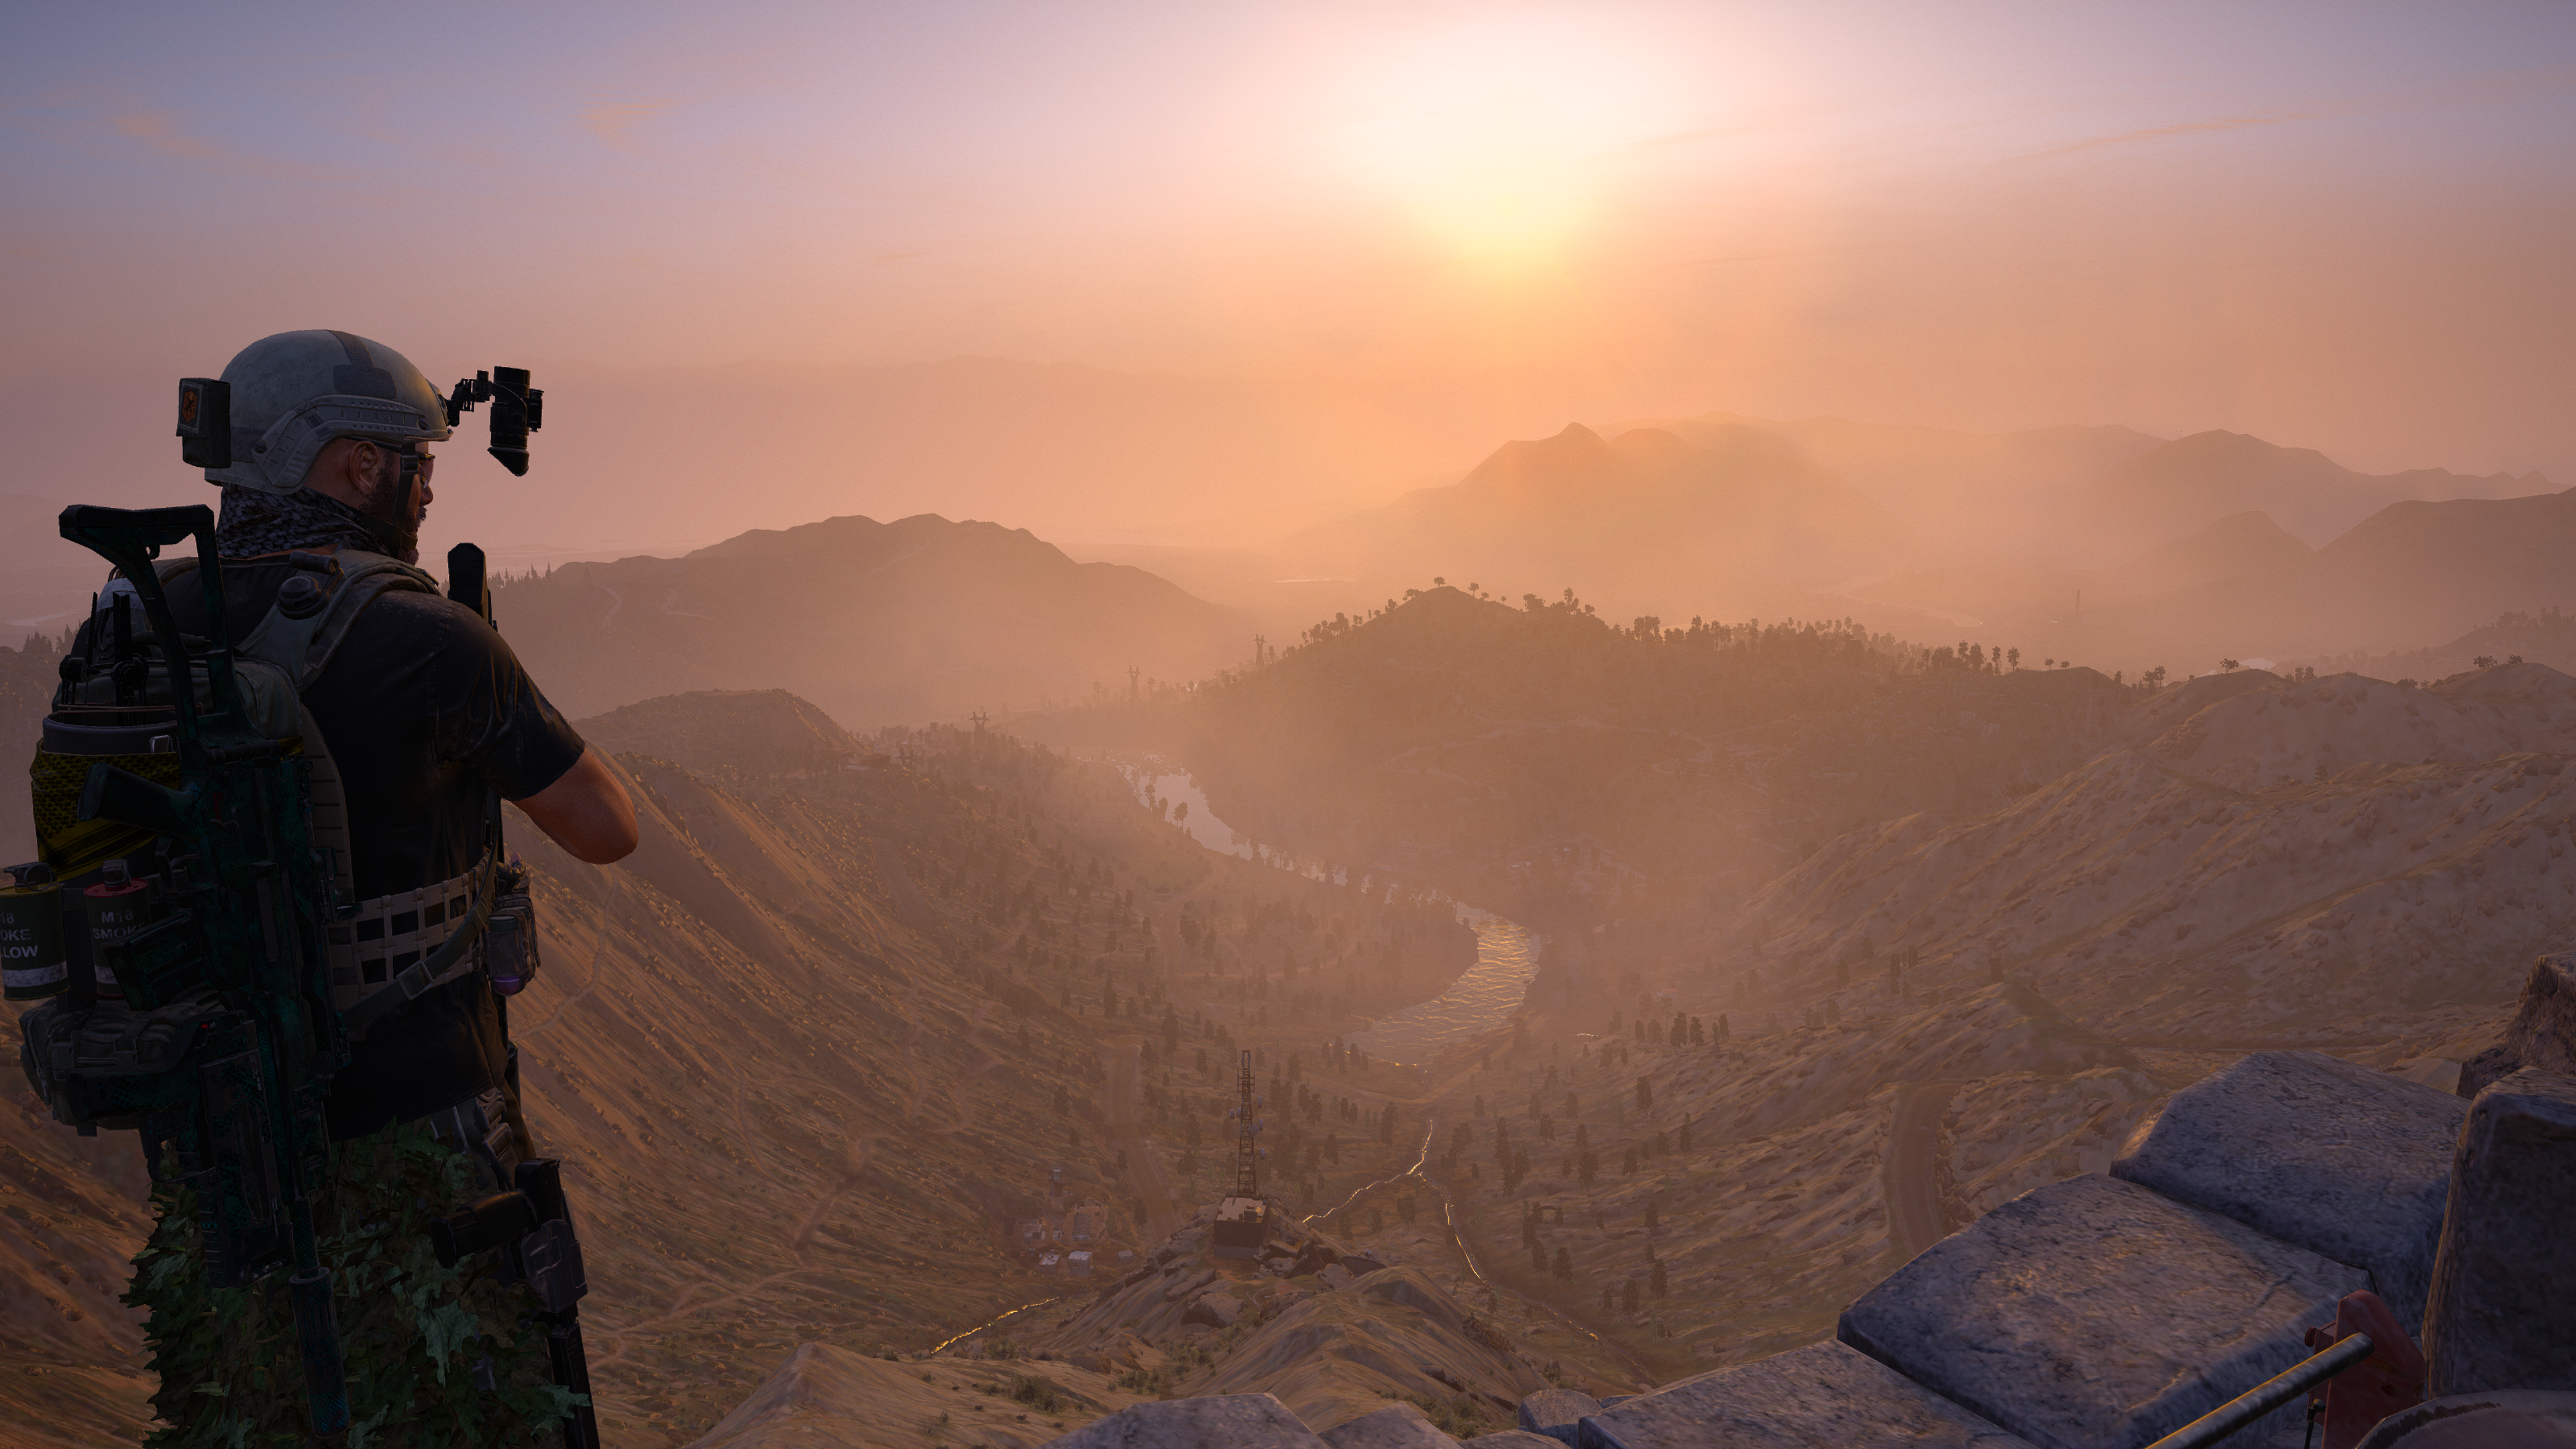 Screenshot from Ghost Recon Wildlands showing a soldier looking out over the stunning Bolivian landscape during a hazy sunrise.